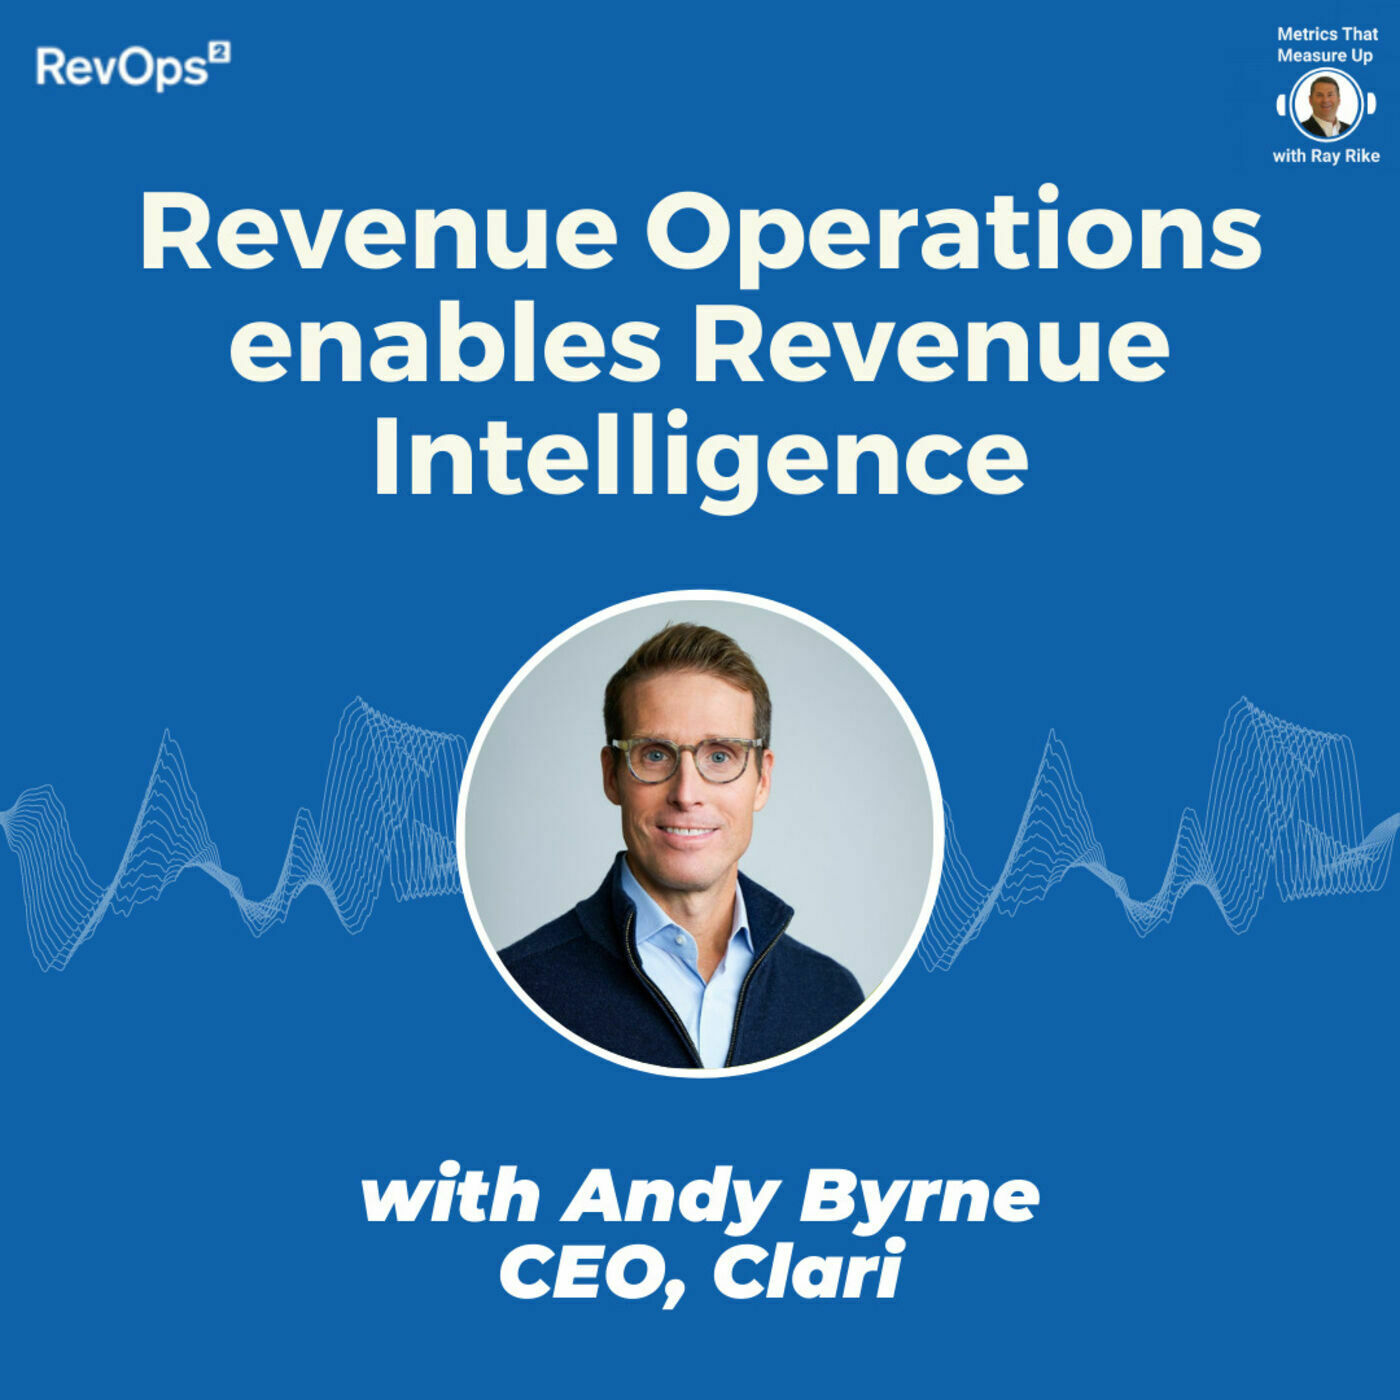 Revenue Operations enables Revenue Intelligence - with Andy Byrne, CEO and Co-Founder Clari